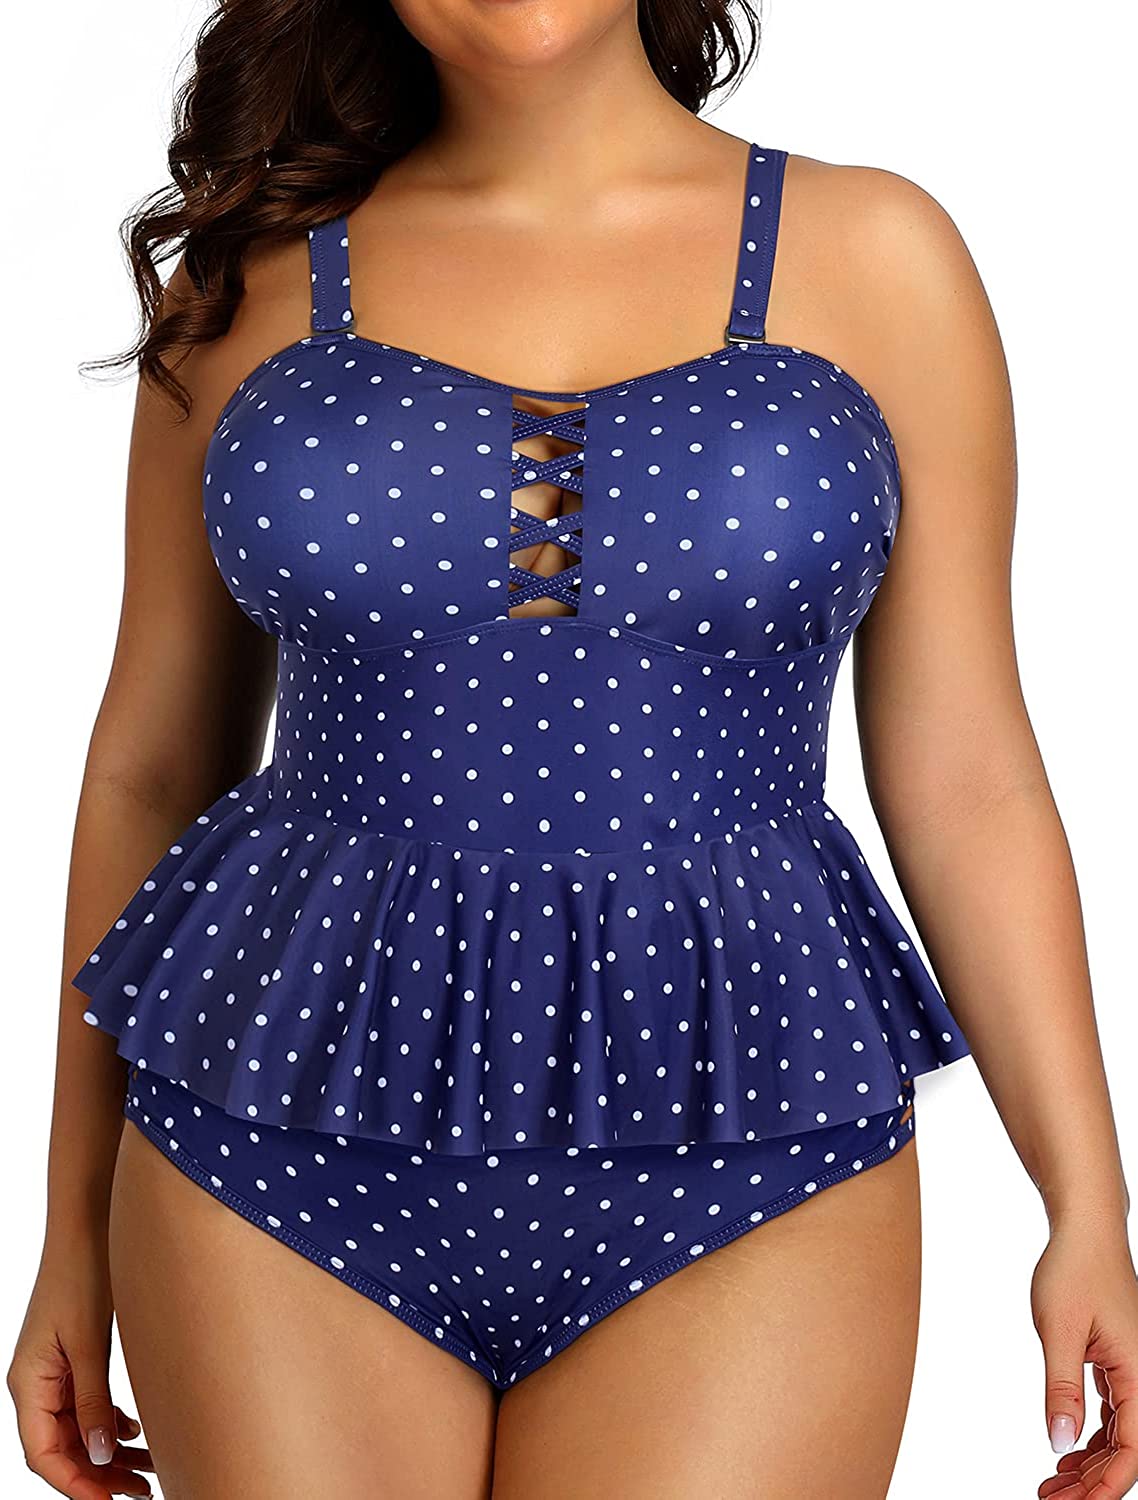 Yonique Plus Size Swimsuits for Women Peplum Tankini Tops High Waisted Tummy Control Two Piece Bathing Suits 